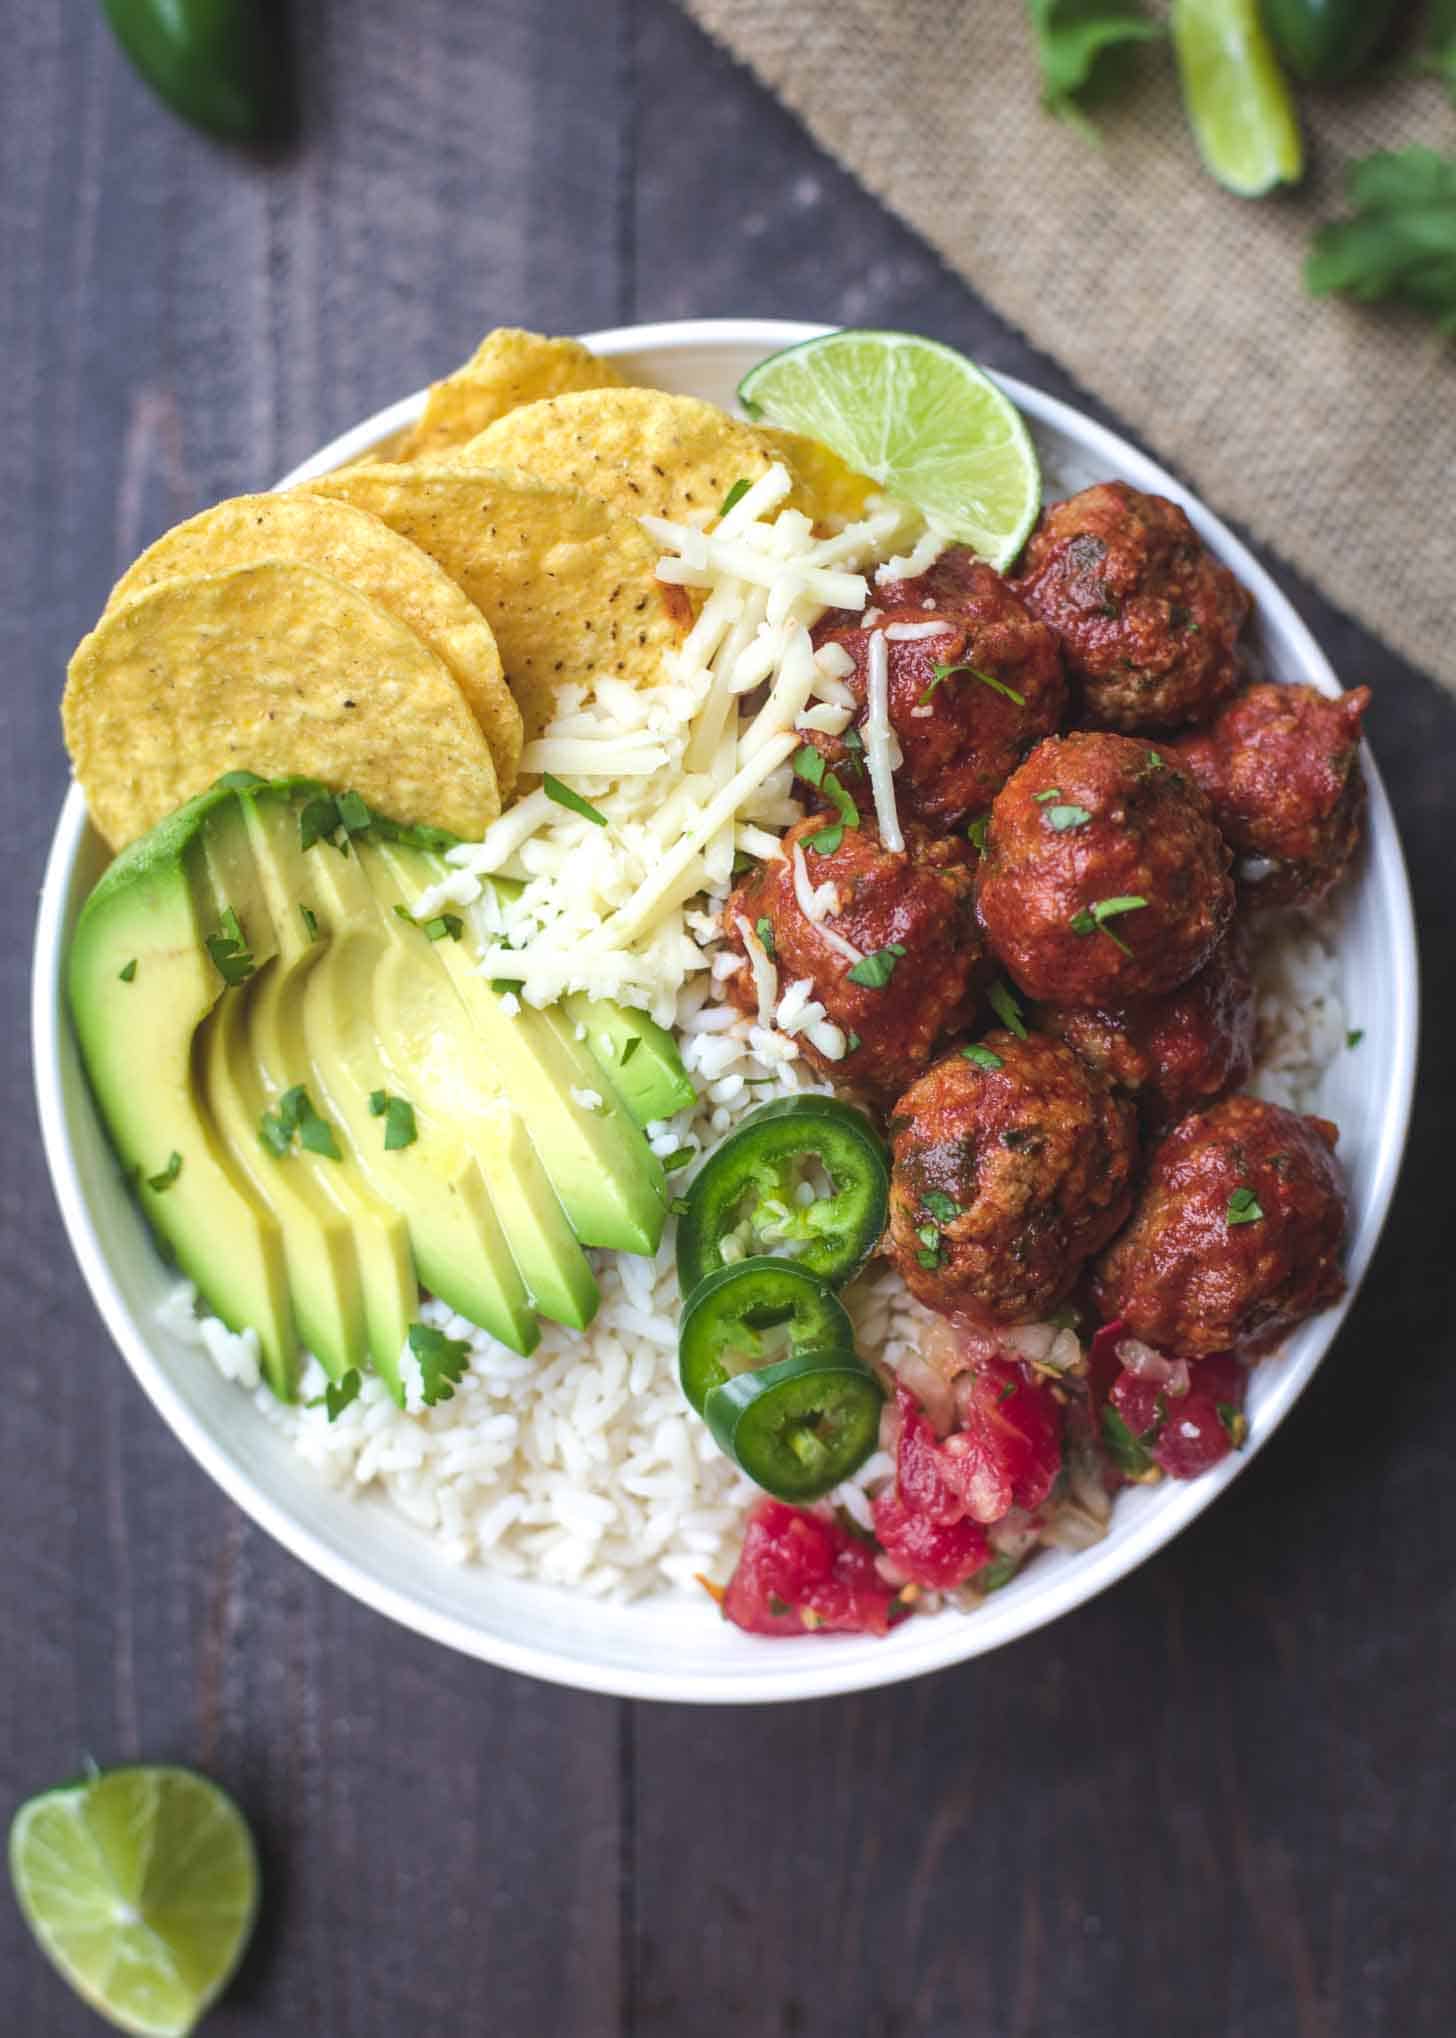 Taco meatballs over rice with avocado, cheese, jalapeno and chips